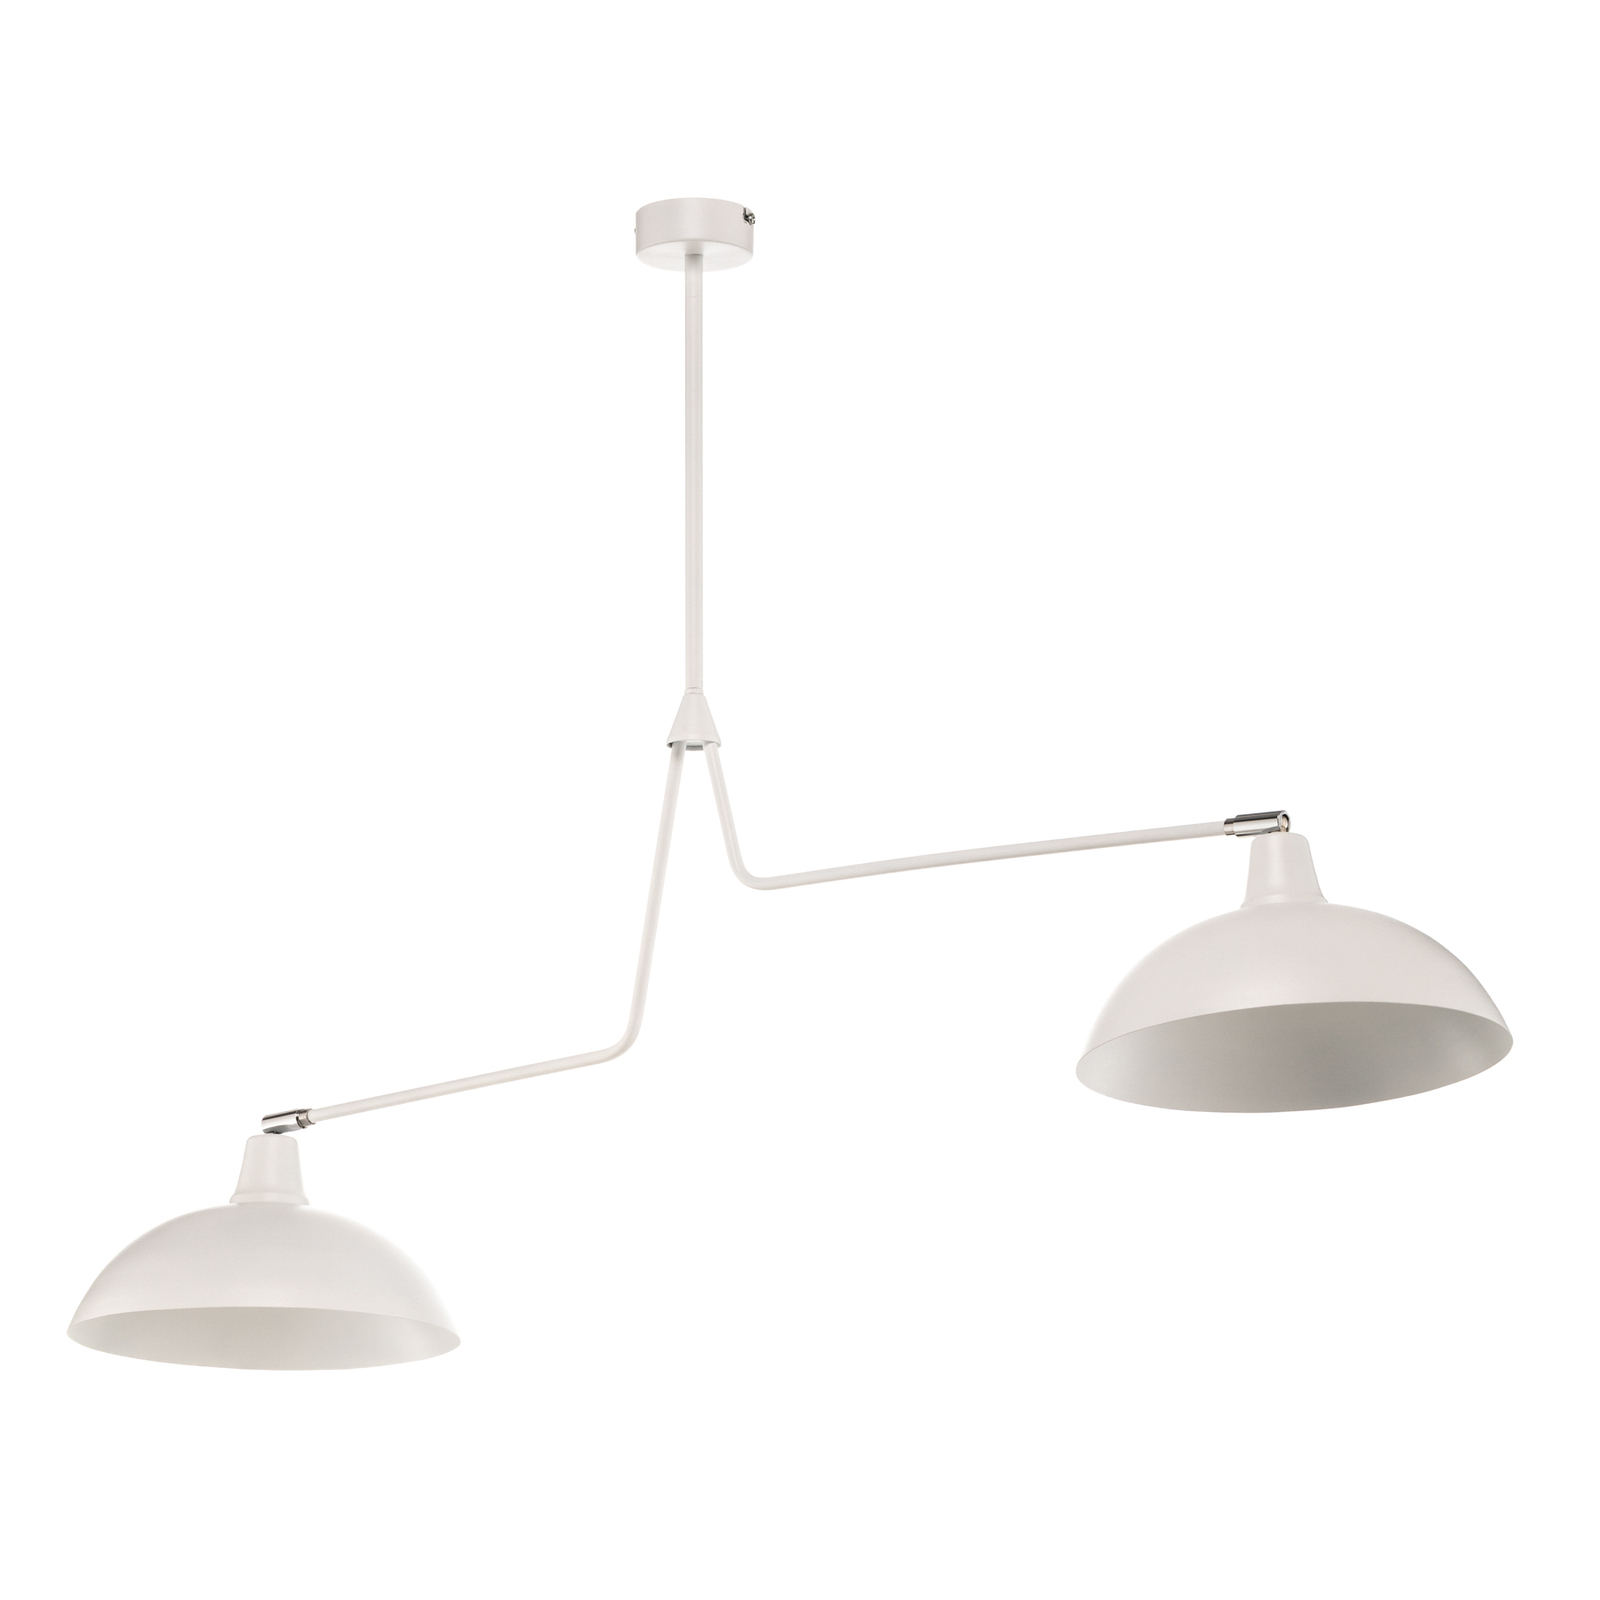 Hanglamp 1036, 2-lamps, wit